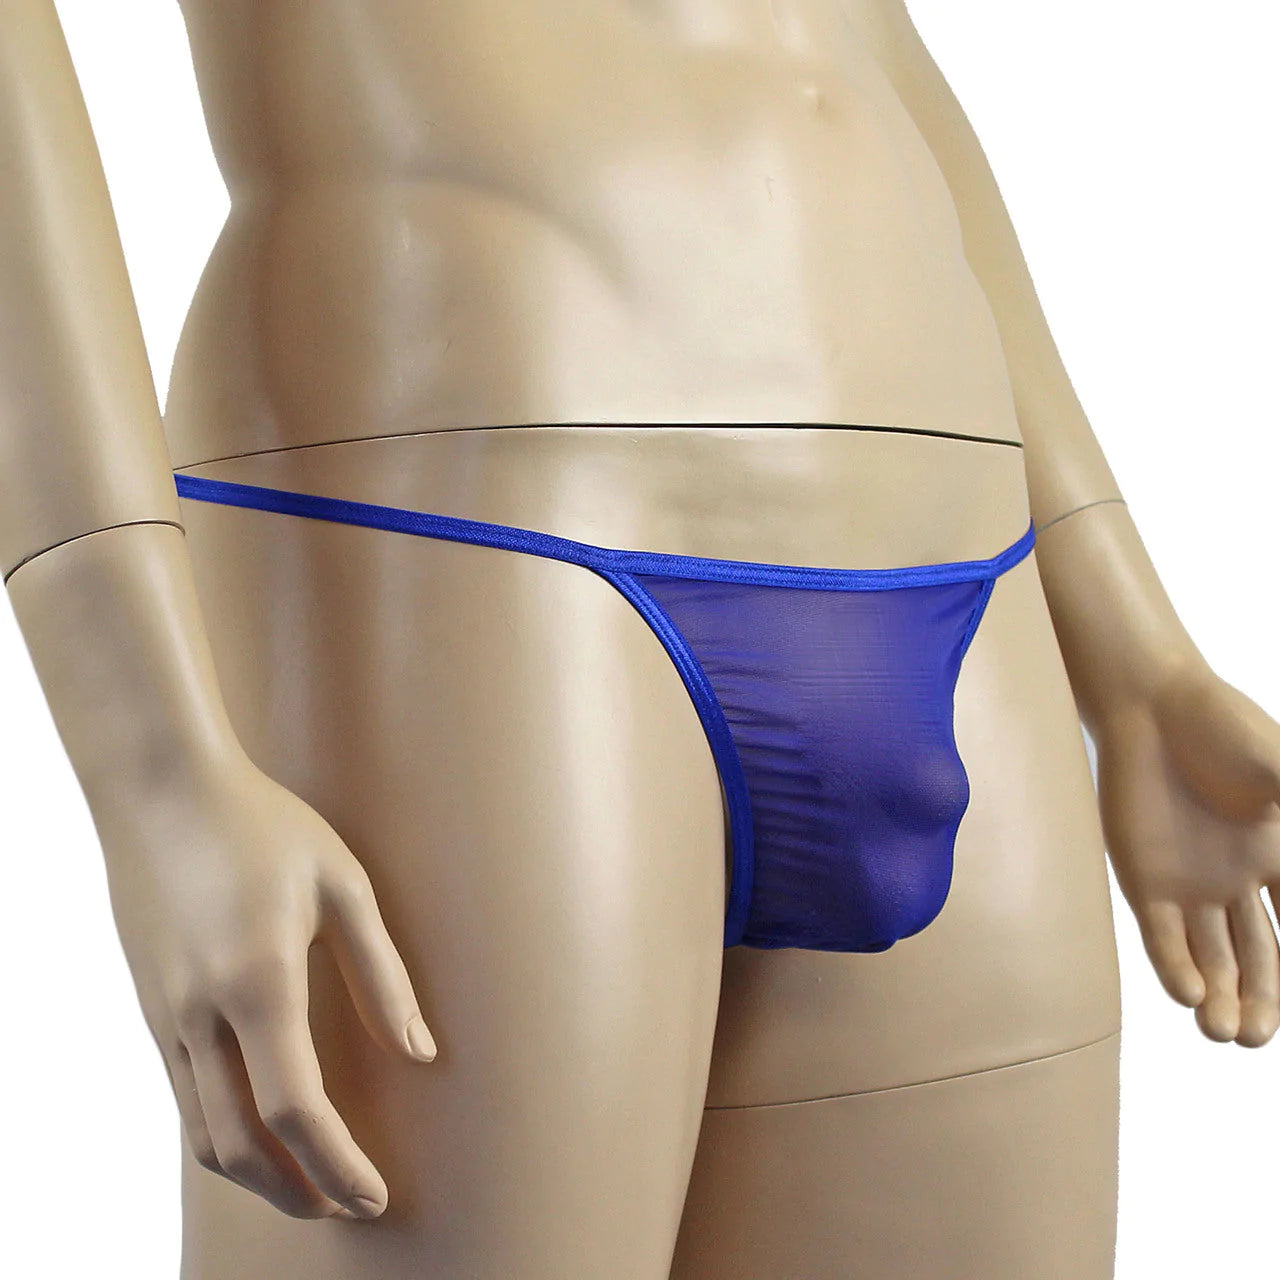 SALE - Mens Vicky See Through Sheer Mesh Pouch G string Blue